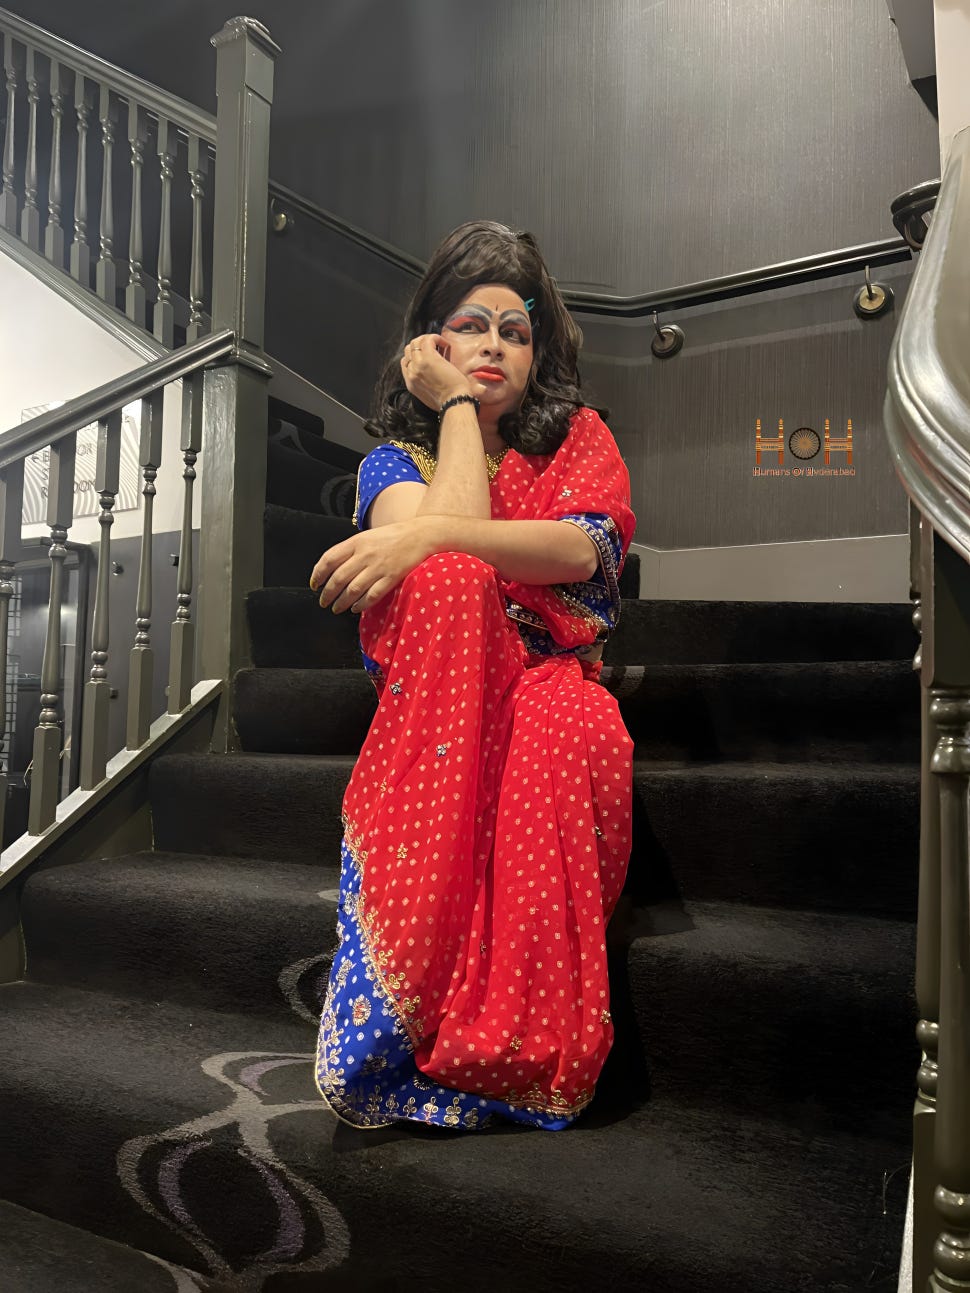 An adult poses on the stairs while wearing traditional Indian drag outfit.